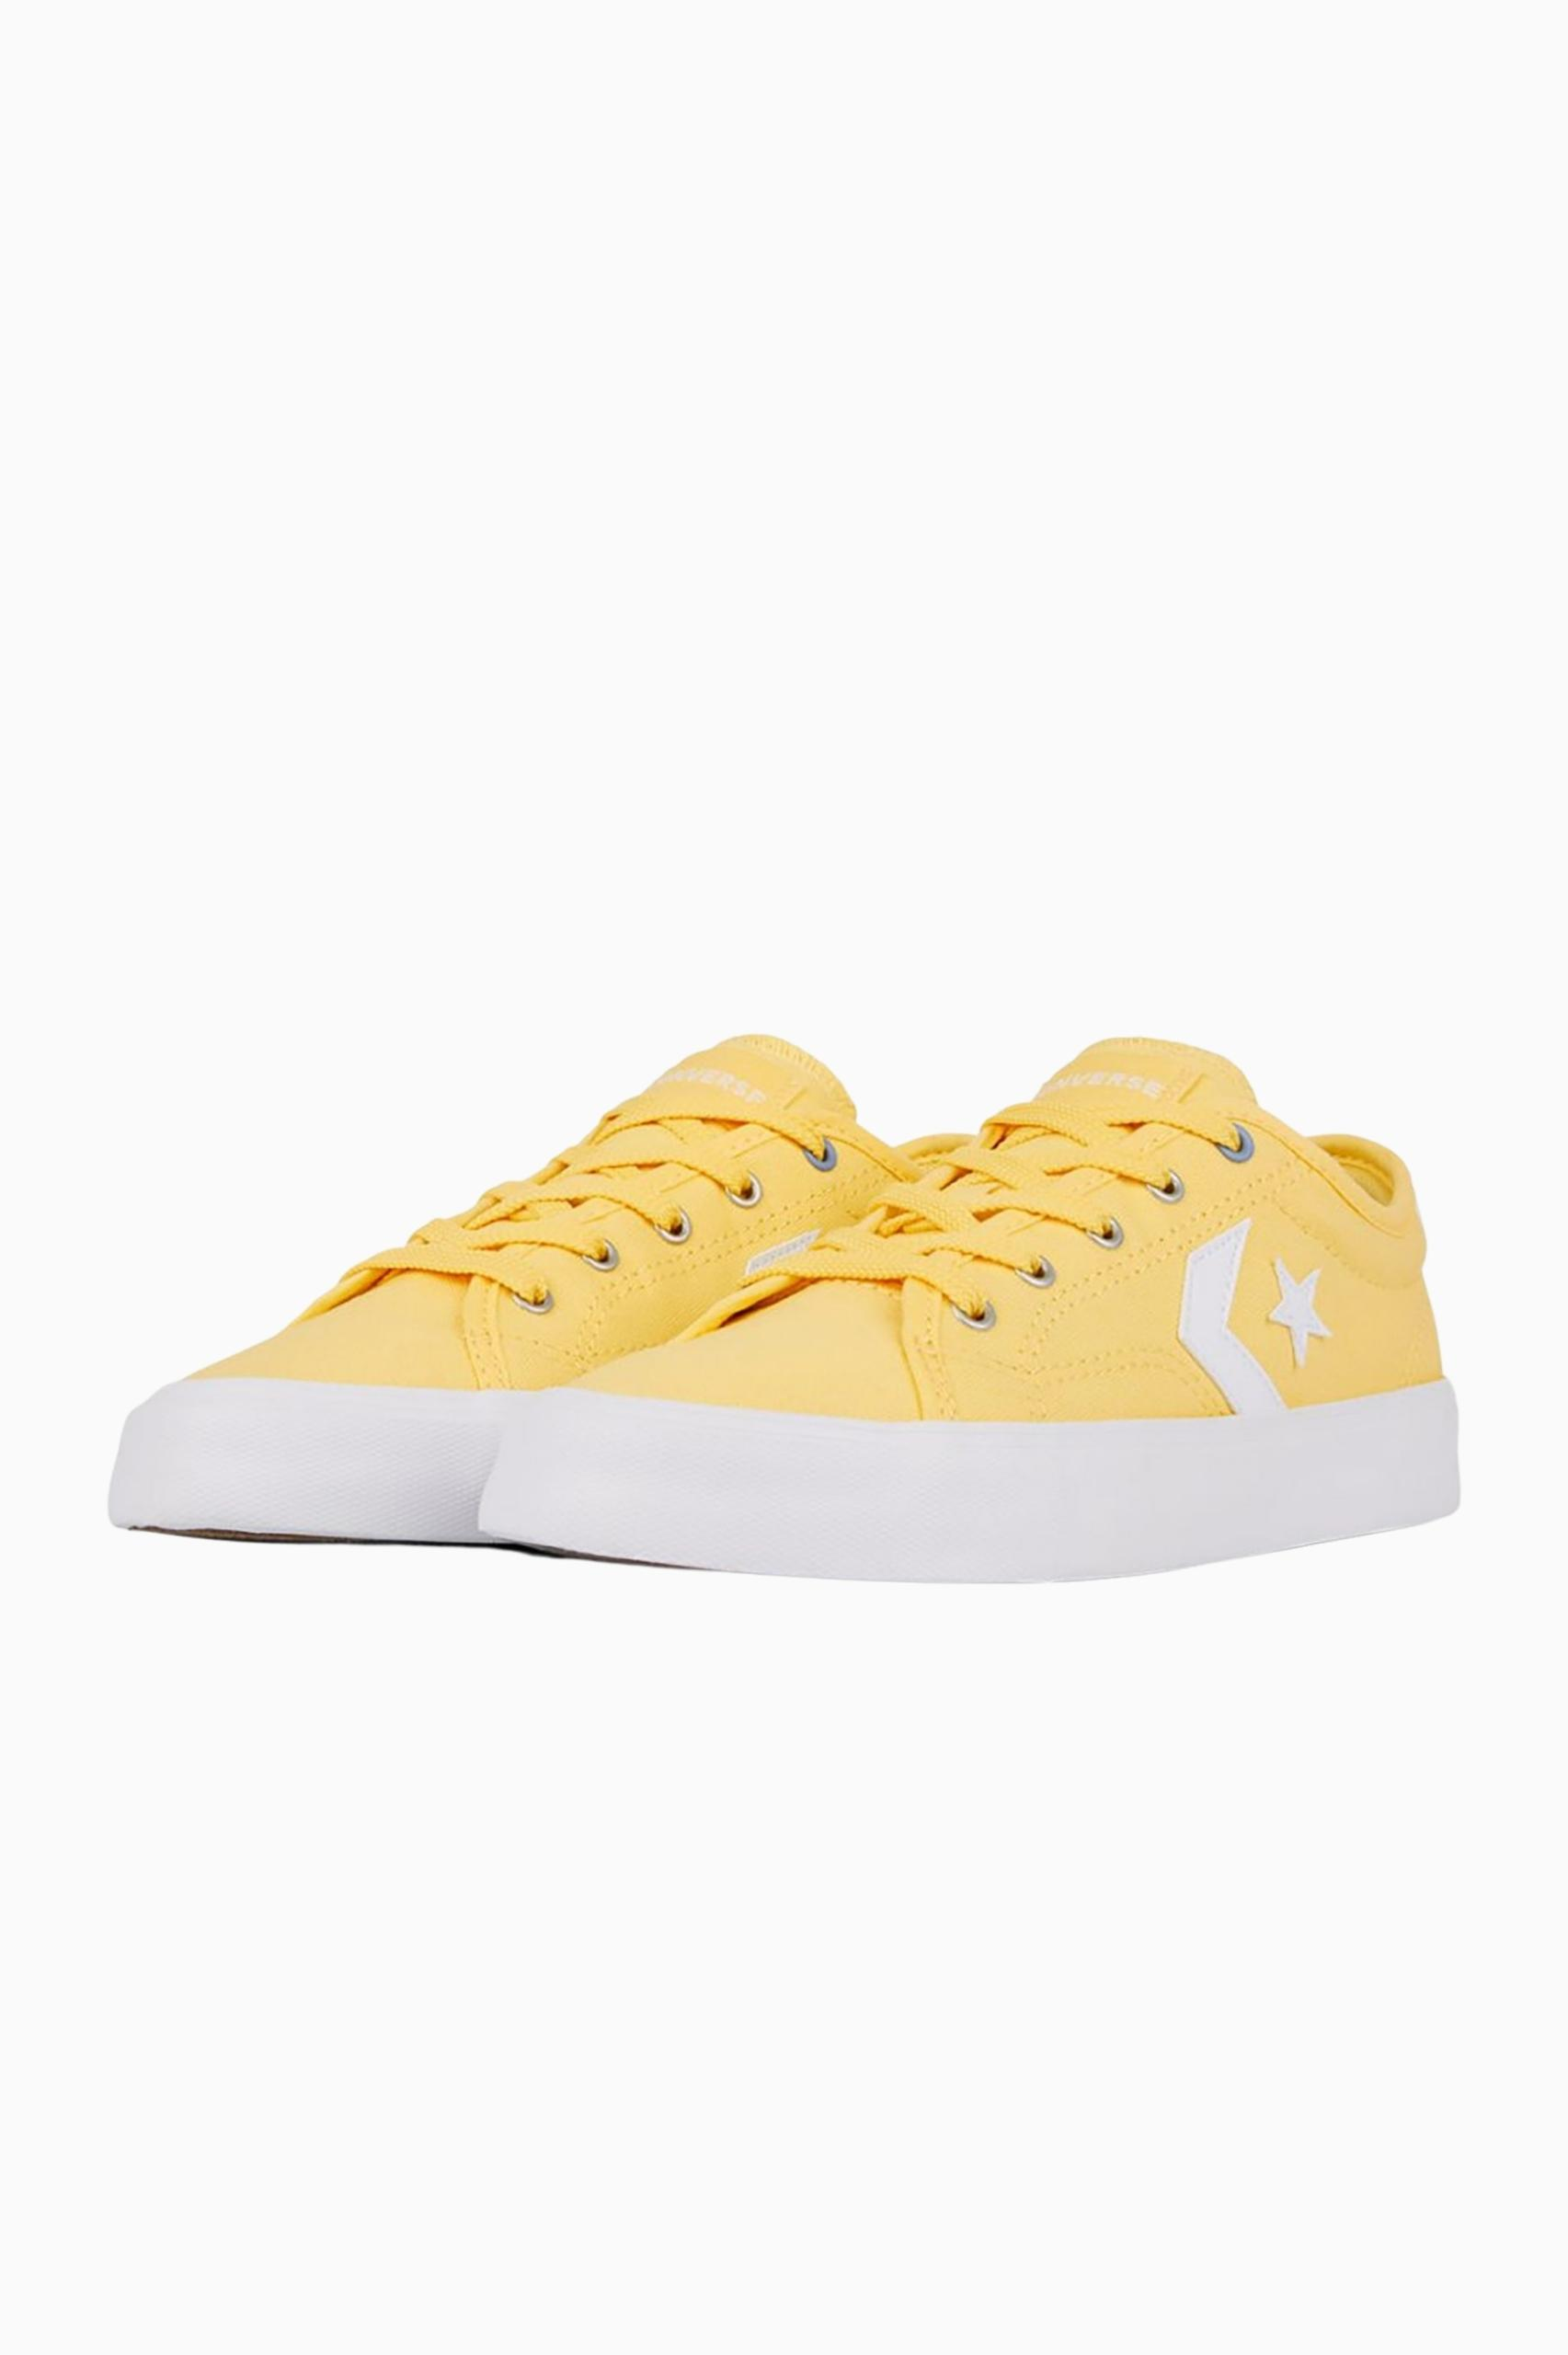 Converse Womens Star Replay Ox - Yellow